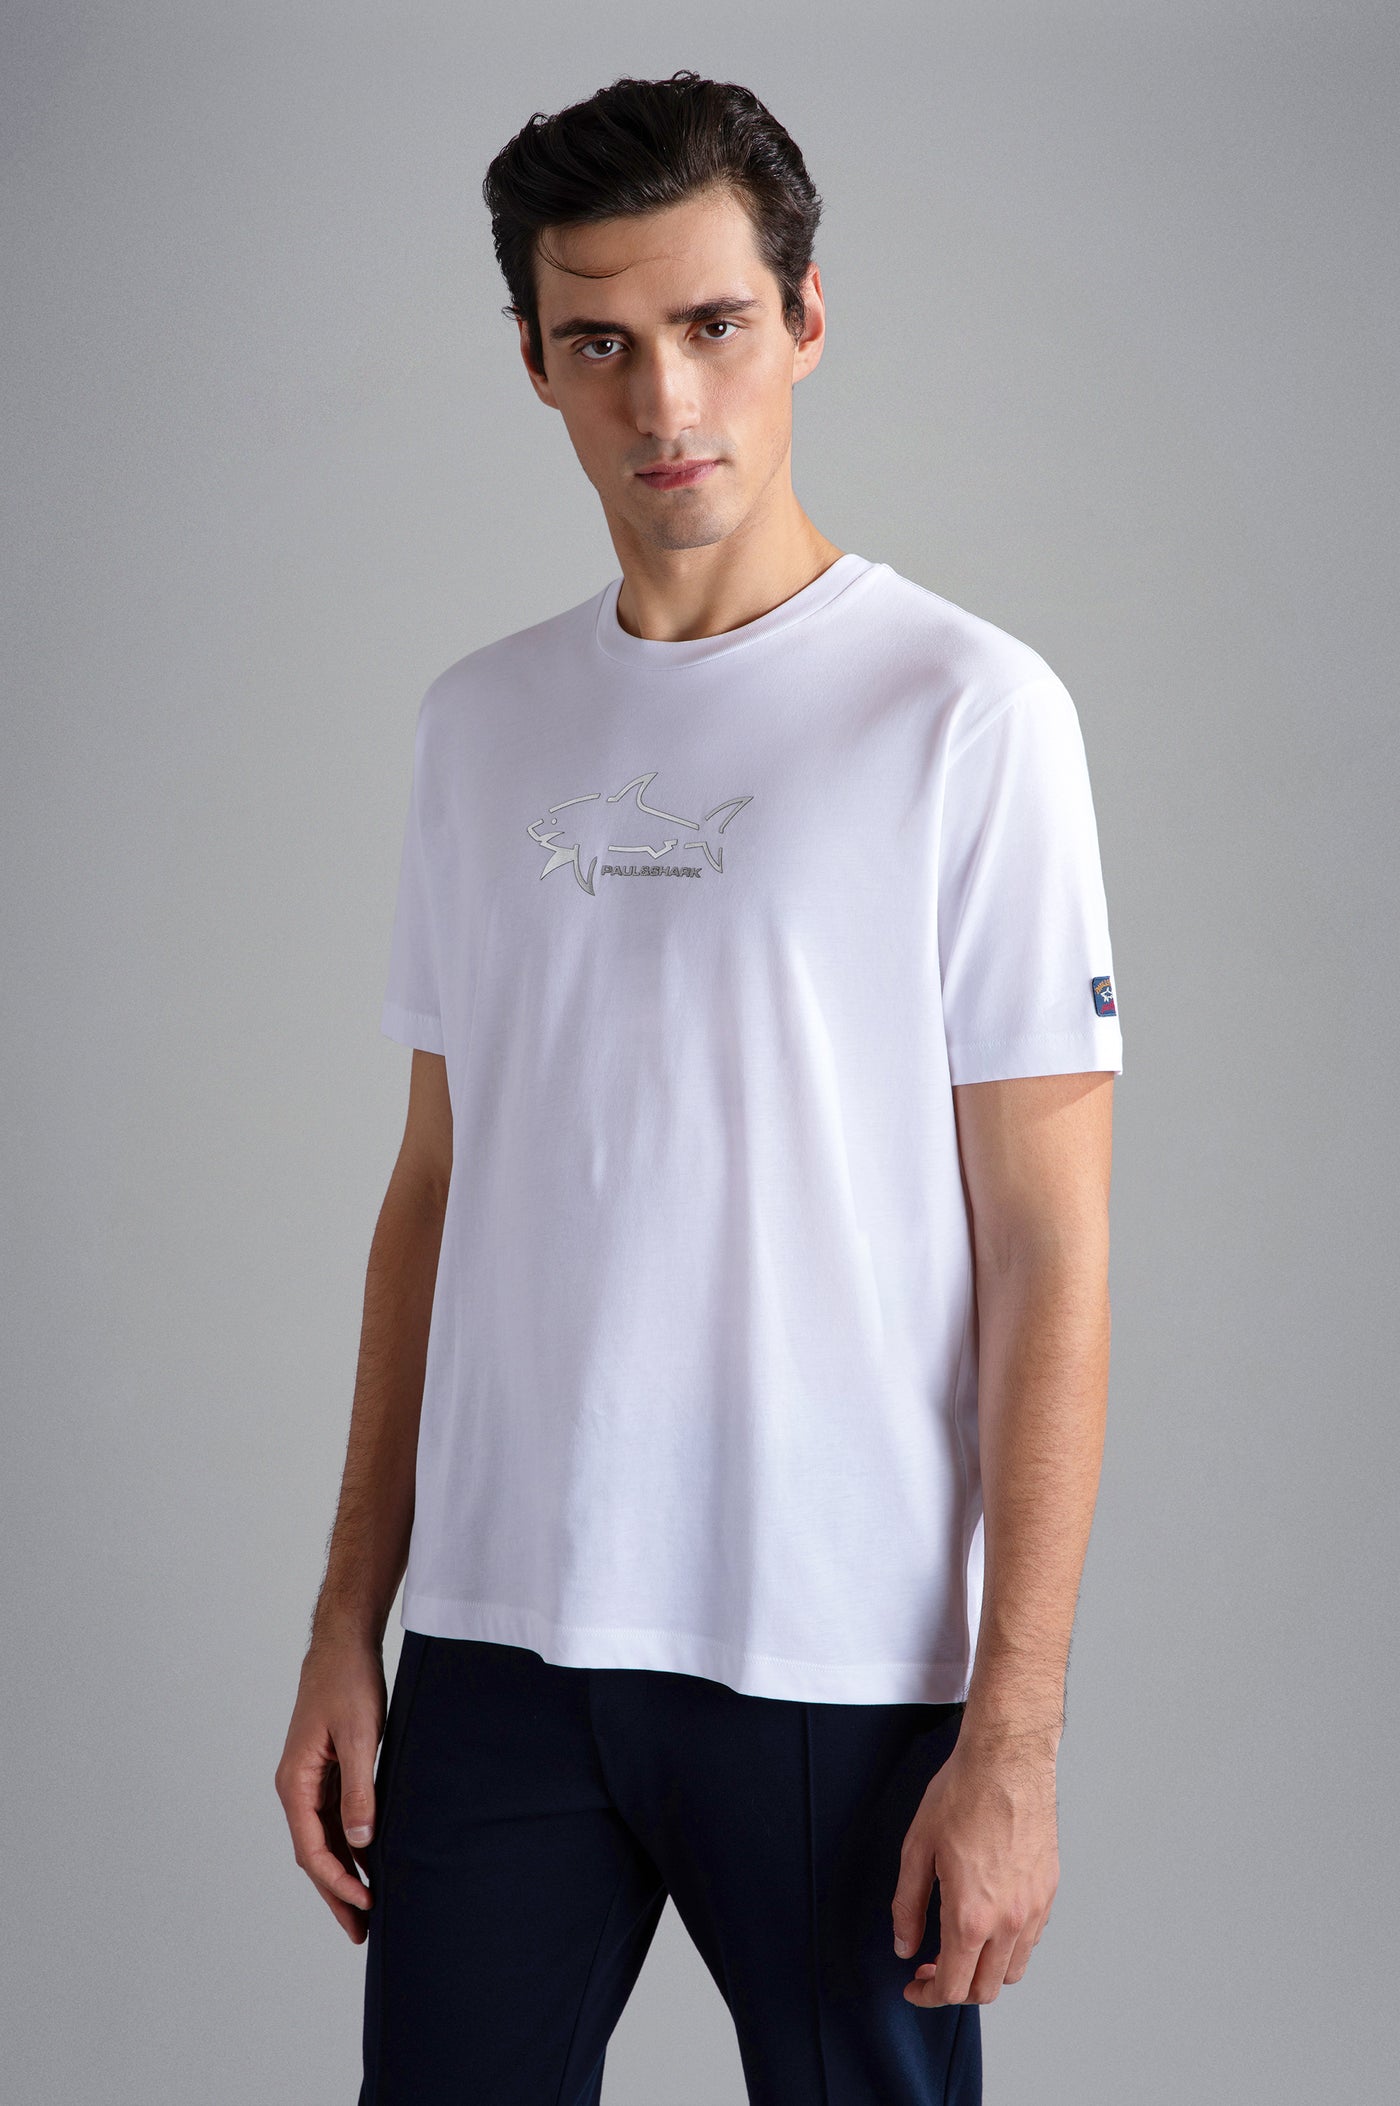 Paul & Shark T-shirt in Cotton with Shark Application and Writing | White